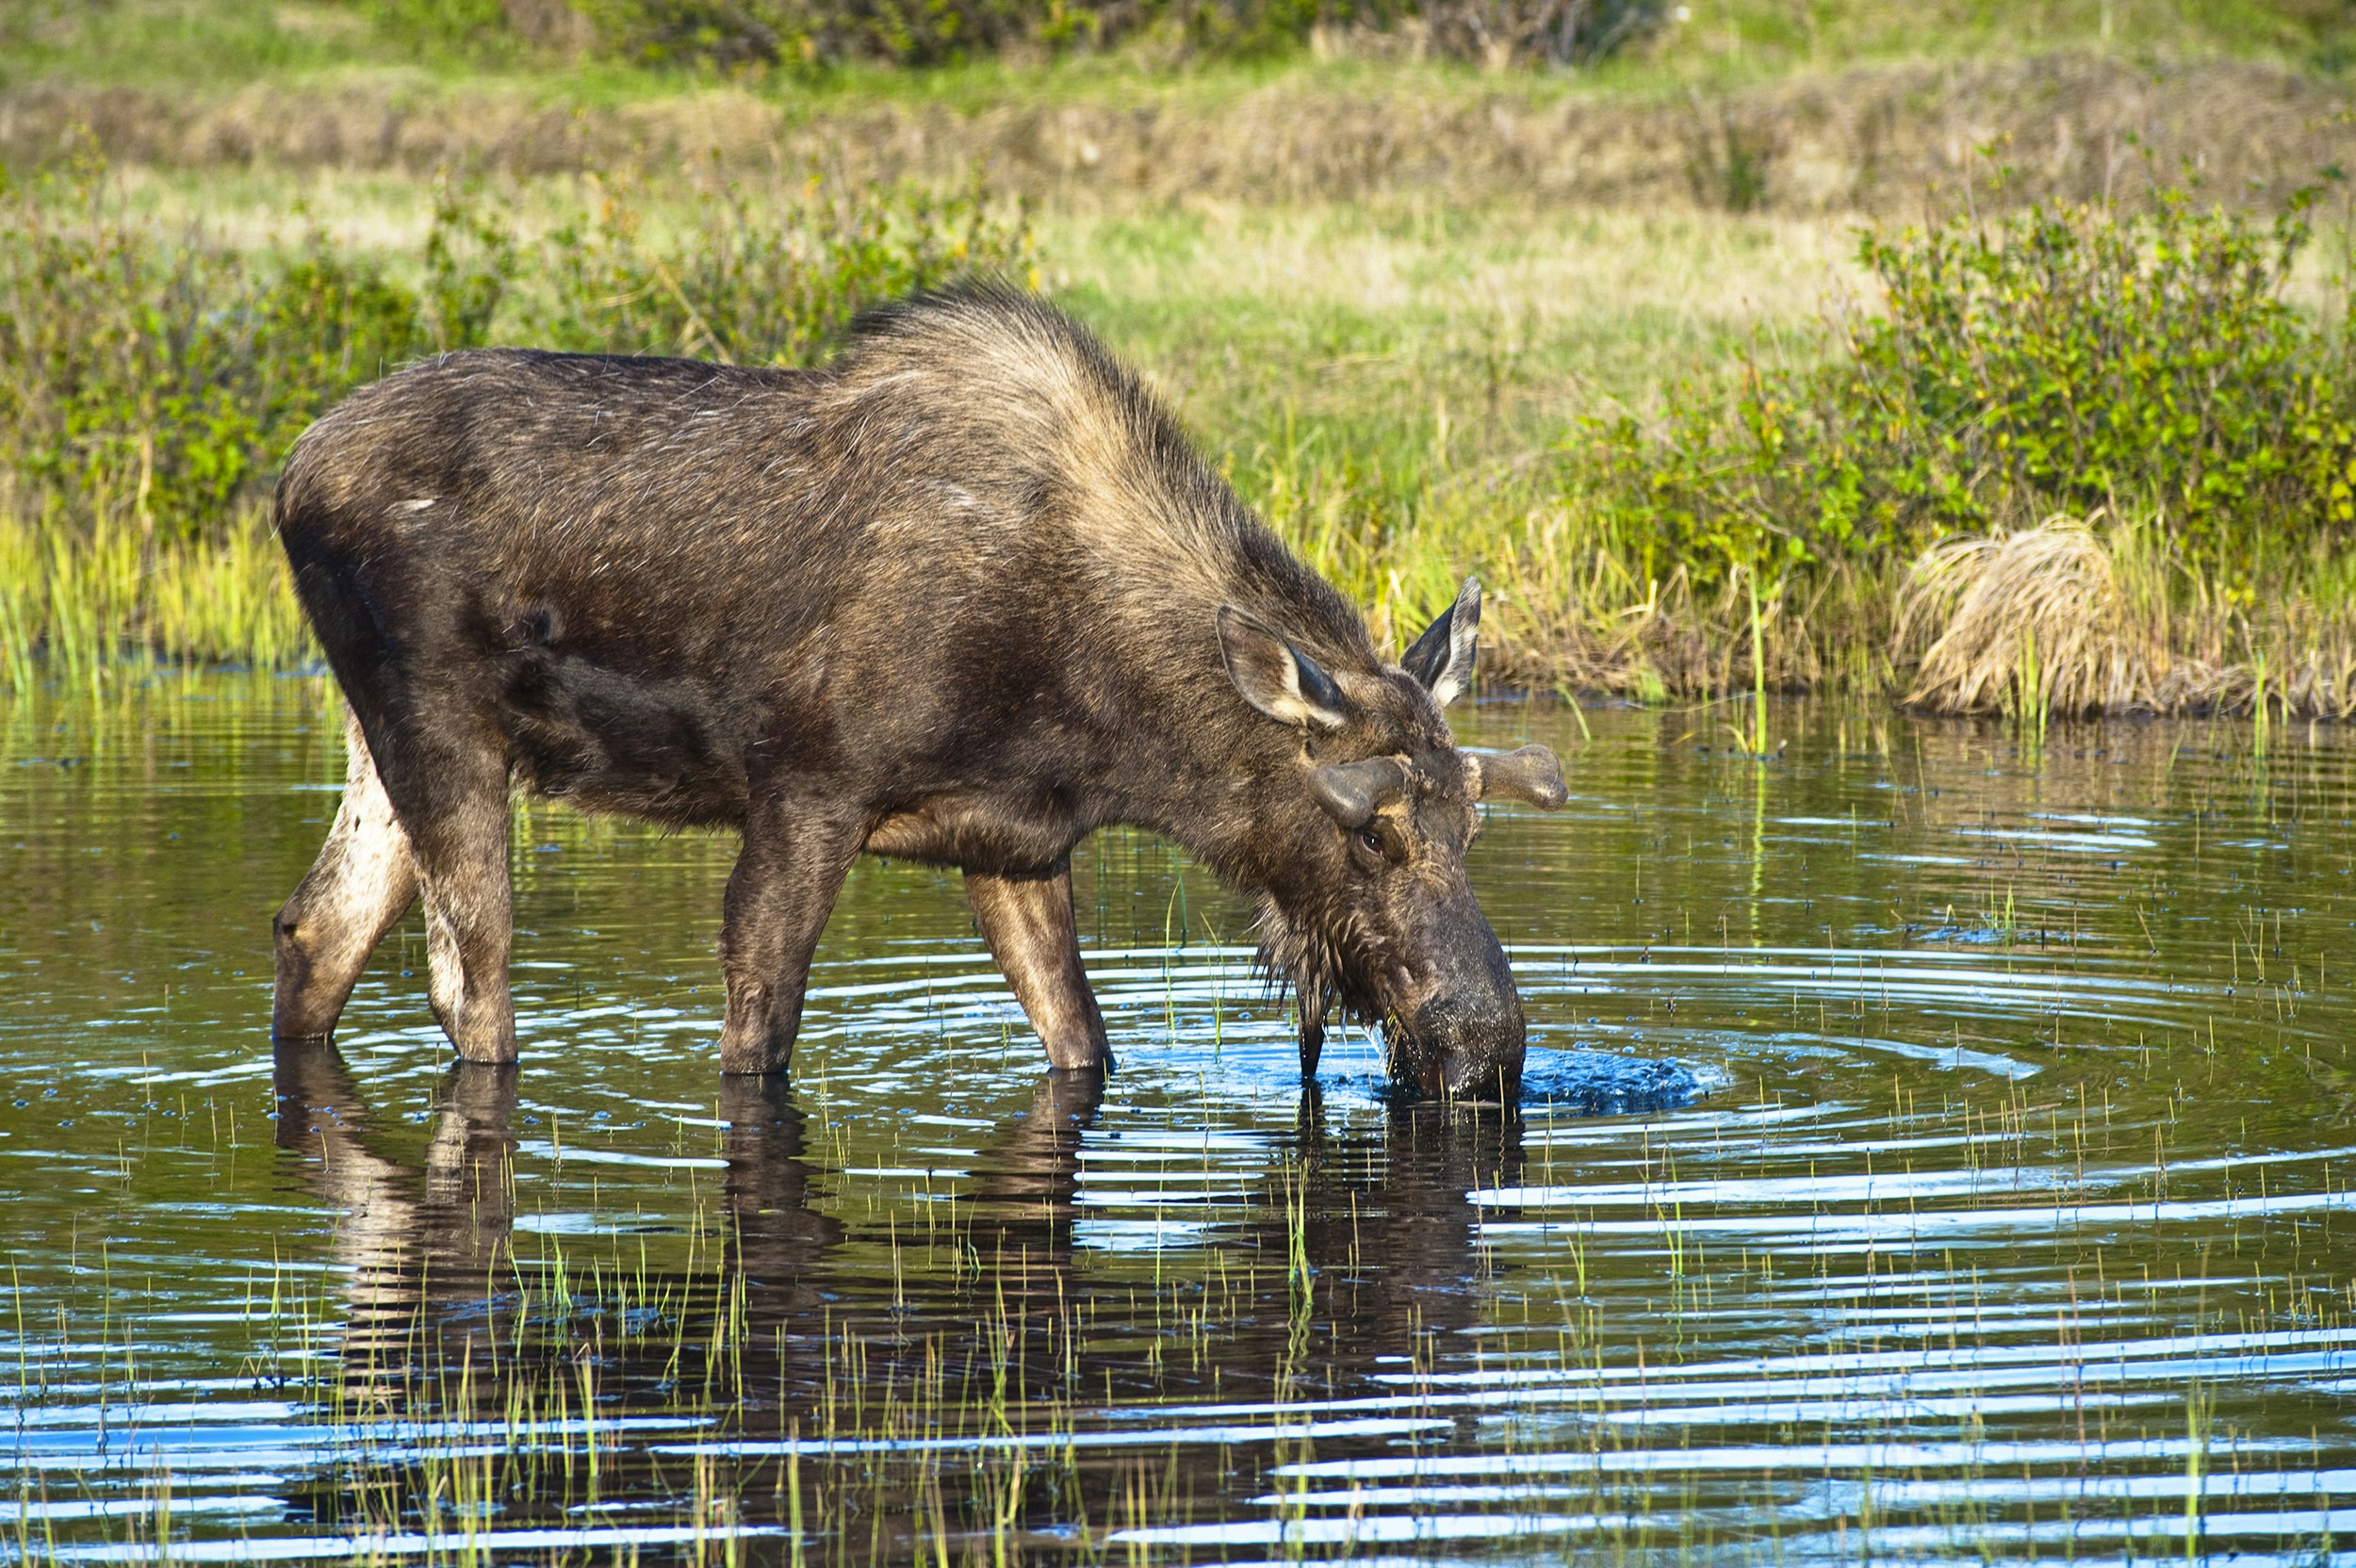 A young bull moose foraging for food in a pond near the Tony Knowles Coastal Trail in Anchorage's Kincaid Park